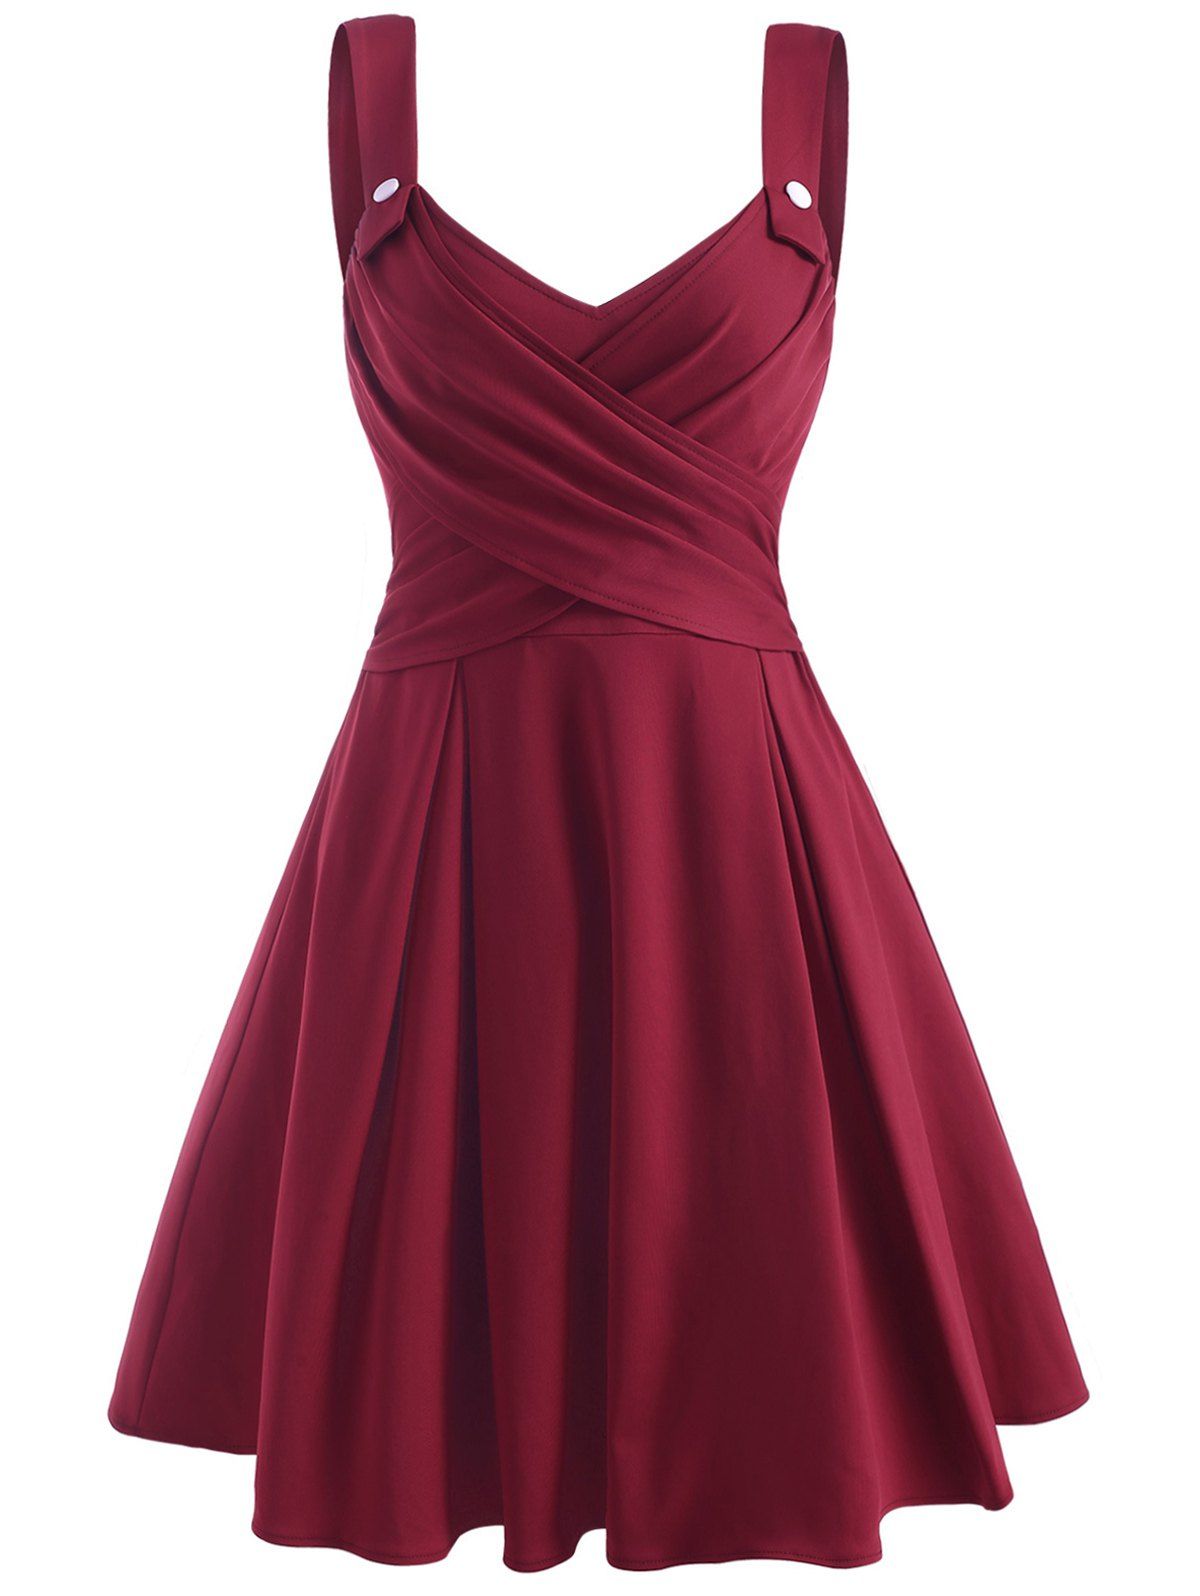 Plus Size & Curve Dress Mock Button Crossover High Waisted Dress A Line Midi Dress - RED L